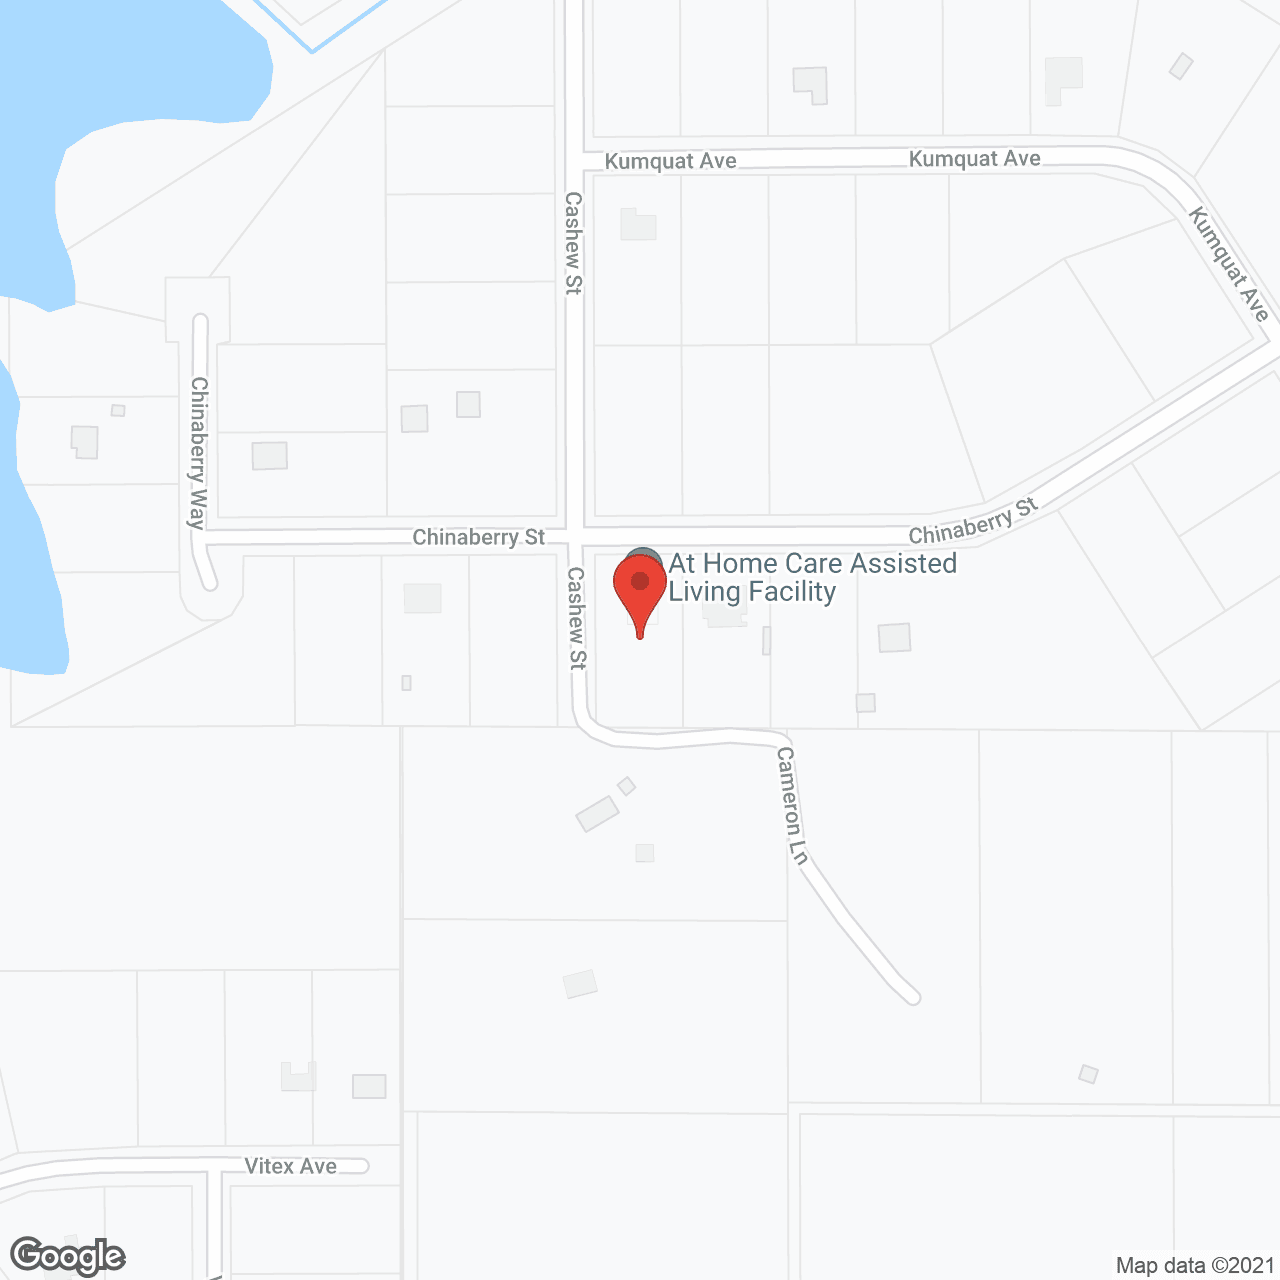 At Home Care Assisted Living Facility in google map